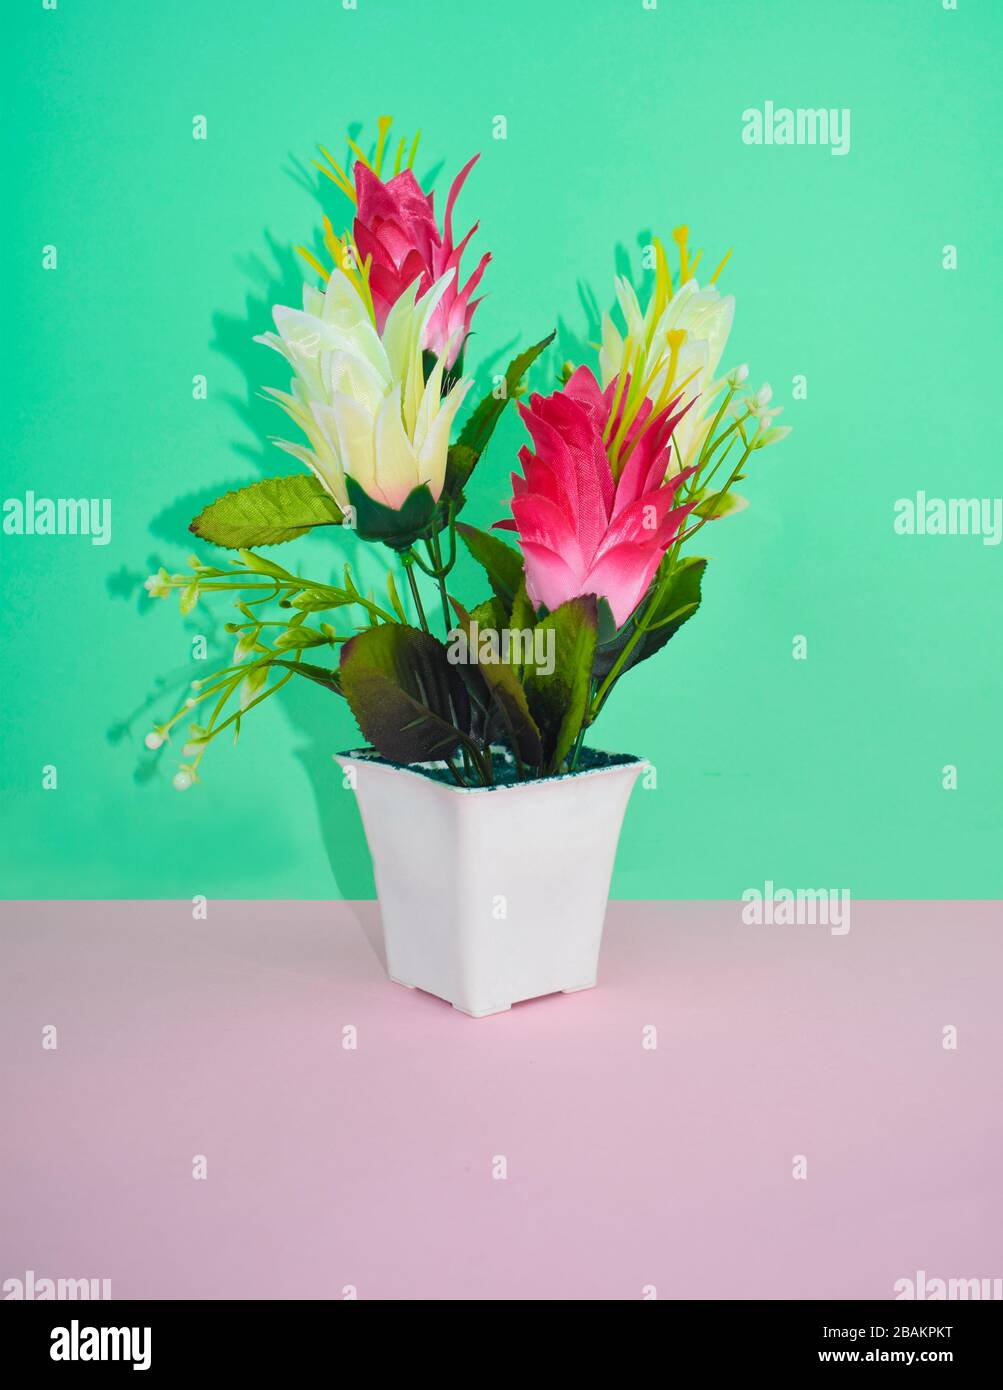 Portrait of a miniature flower bouquet with different colored small flowers on top of a desk Stock Photo